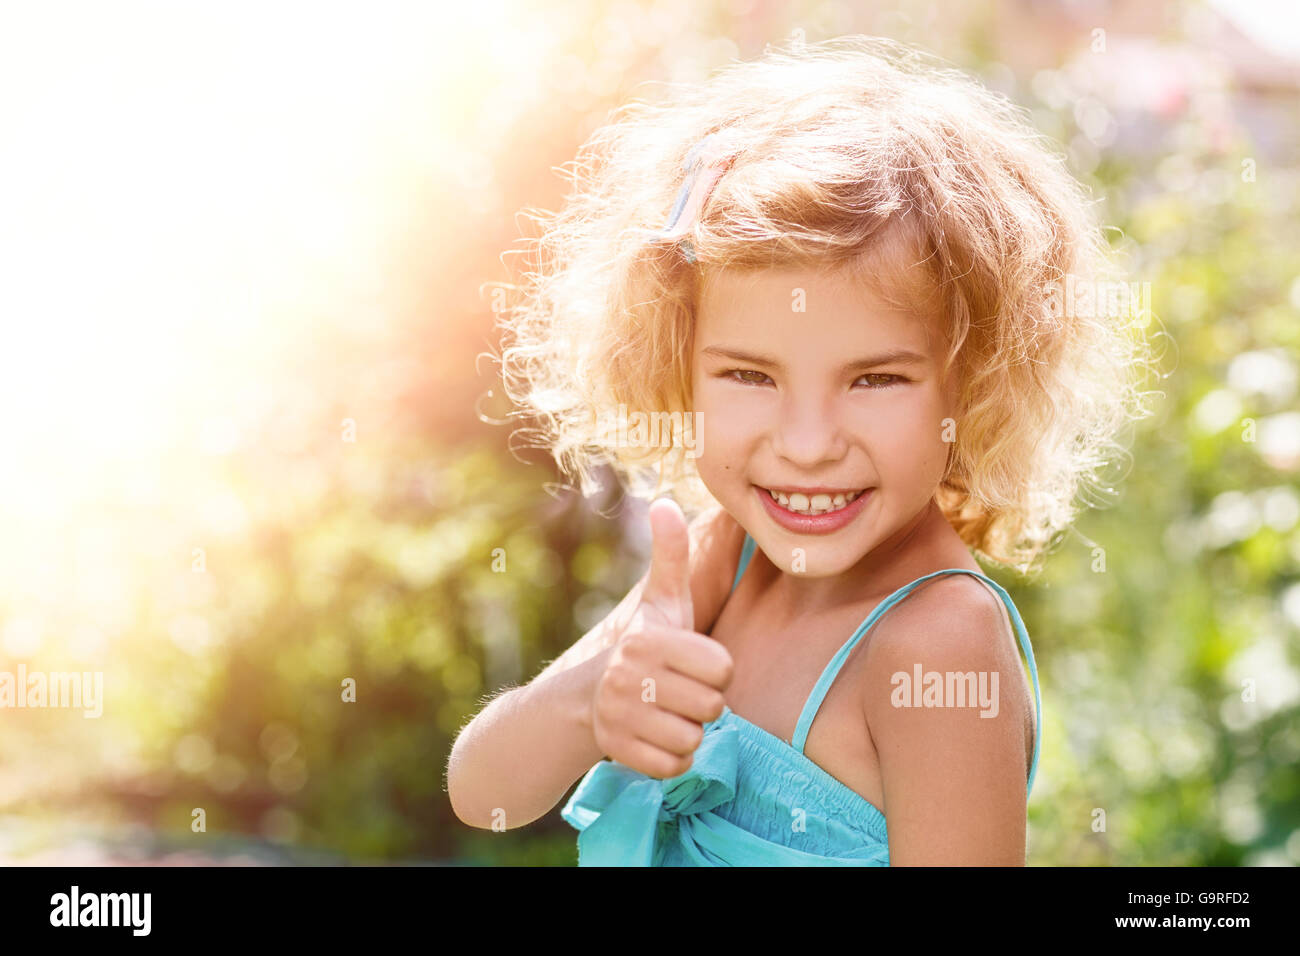 Portrait of a smiling little girl Stock Photo